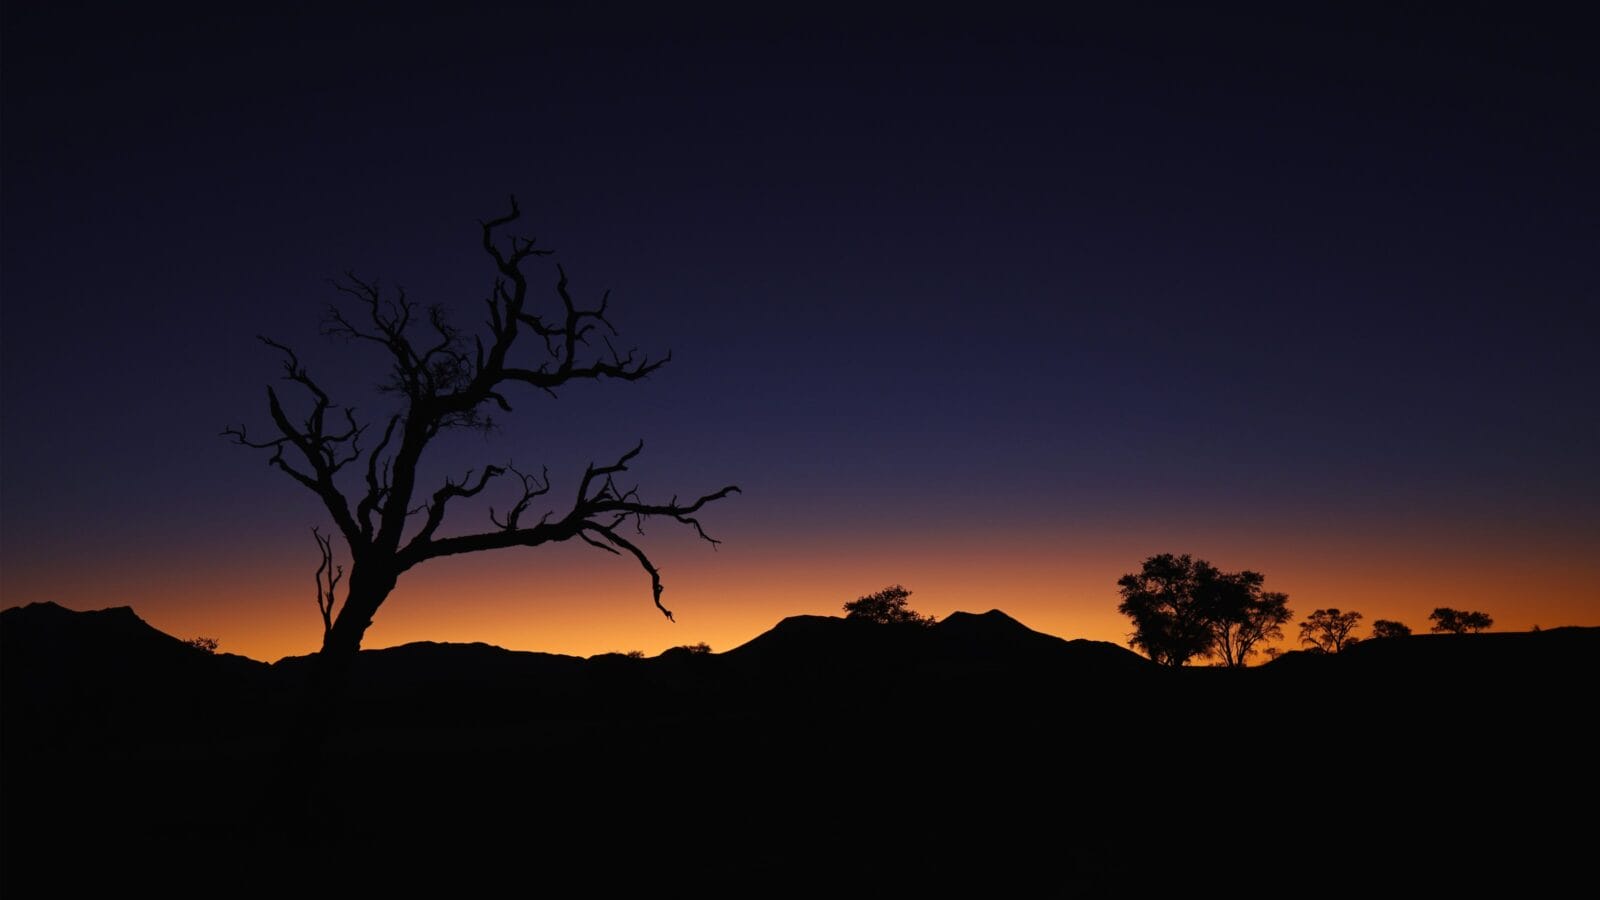 <p>One of the best places to stargaze is the NamibRand Nature Reserve in Namibia. In fact, it is second place in the world to be listed as a Gold Tier International Dark Sky Reserve. This title helps preserve the location, keeping it restricted and dark! Here you will find sand dunes and dark skies that will show off millions of stars. To top it all off, there are several local lodges that offer stargazing safaris, astronomy programs, and even hotel rooms with open-sky stargazing ceilings. You can sleep under the stars in the lap of luxury here! </p>